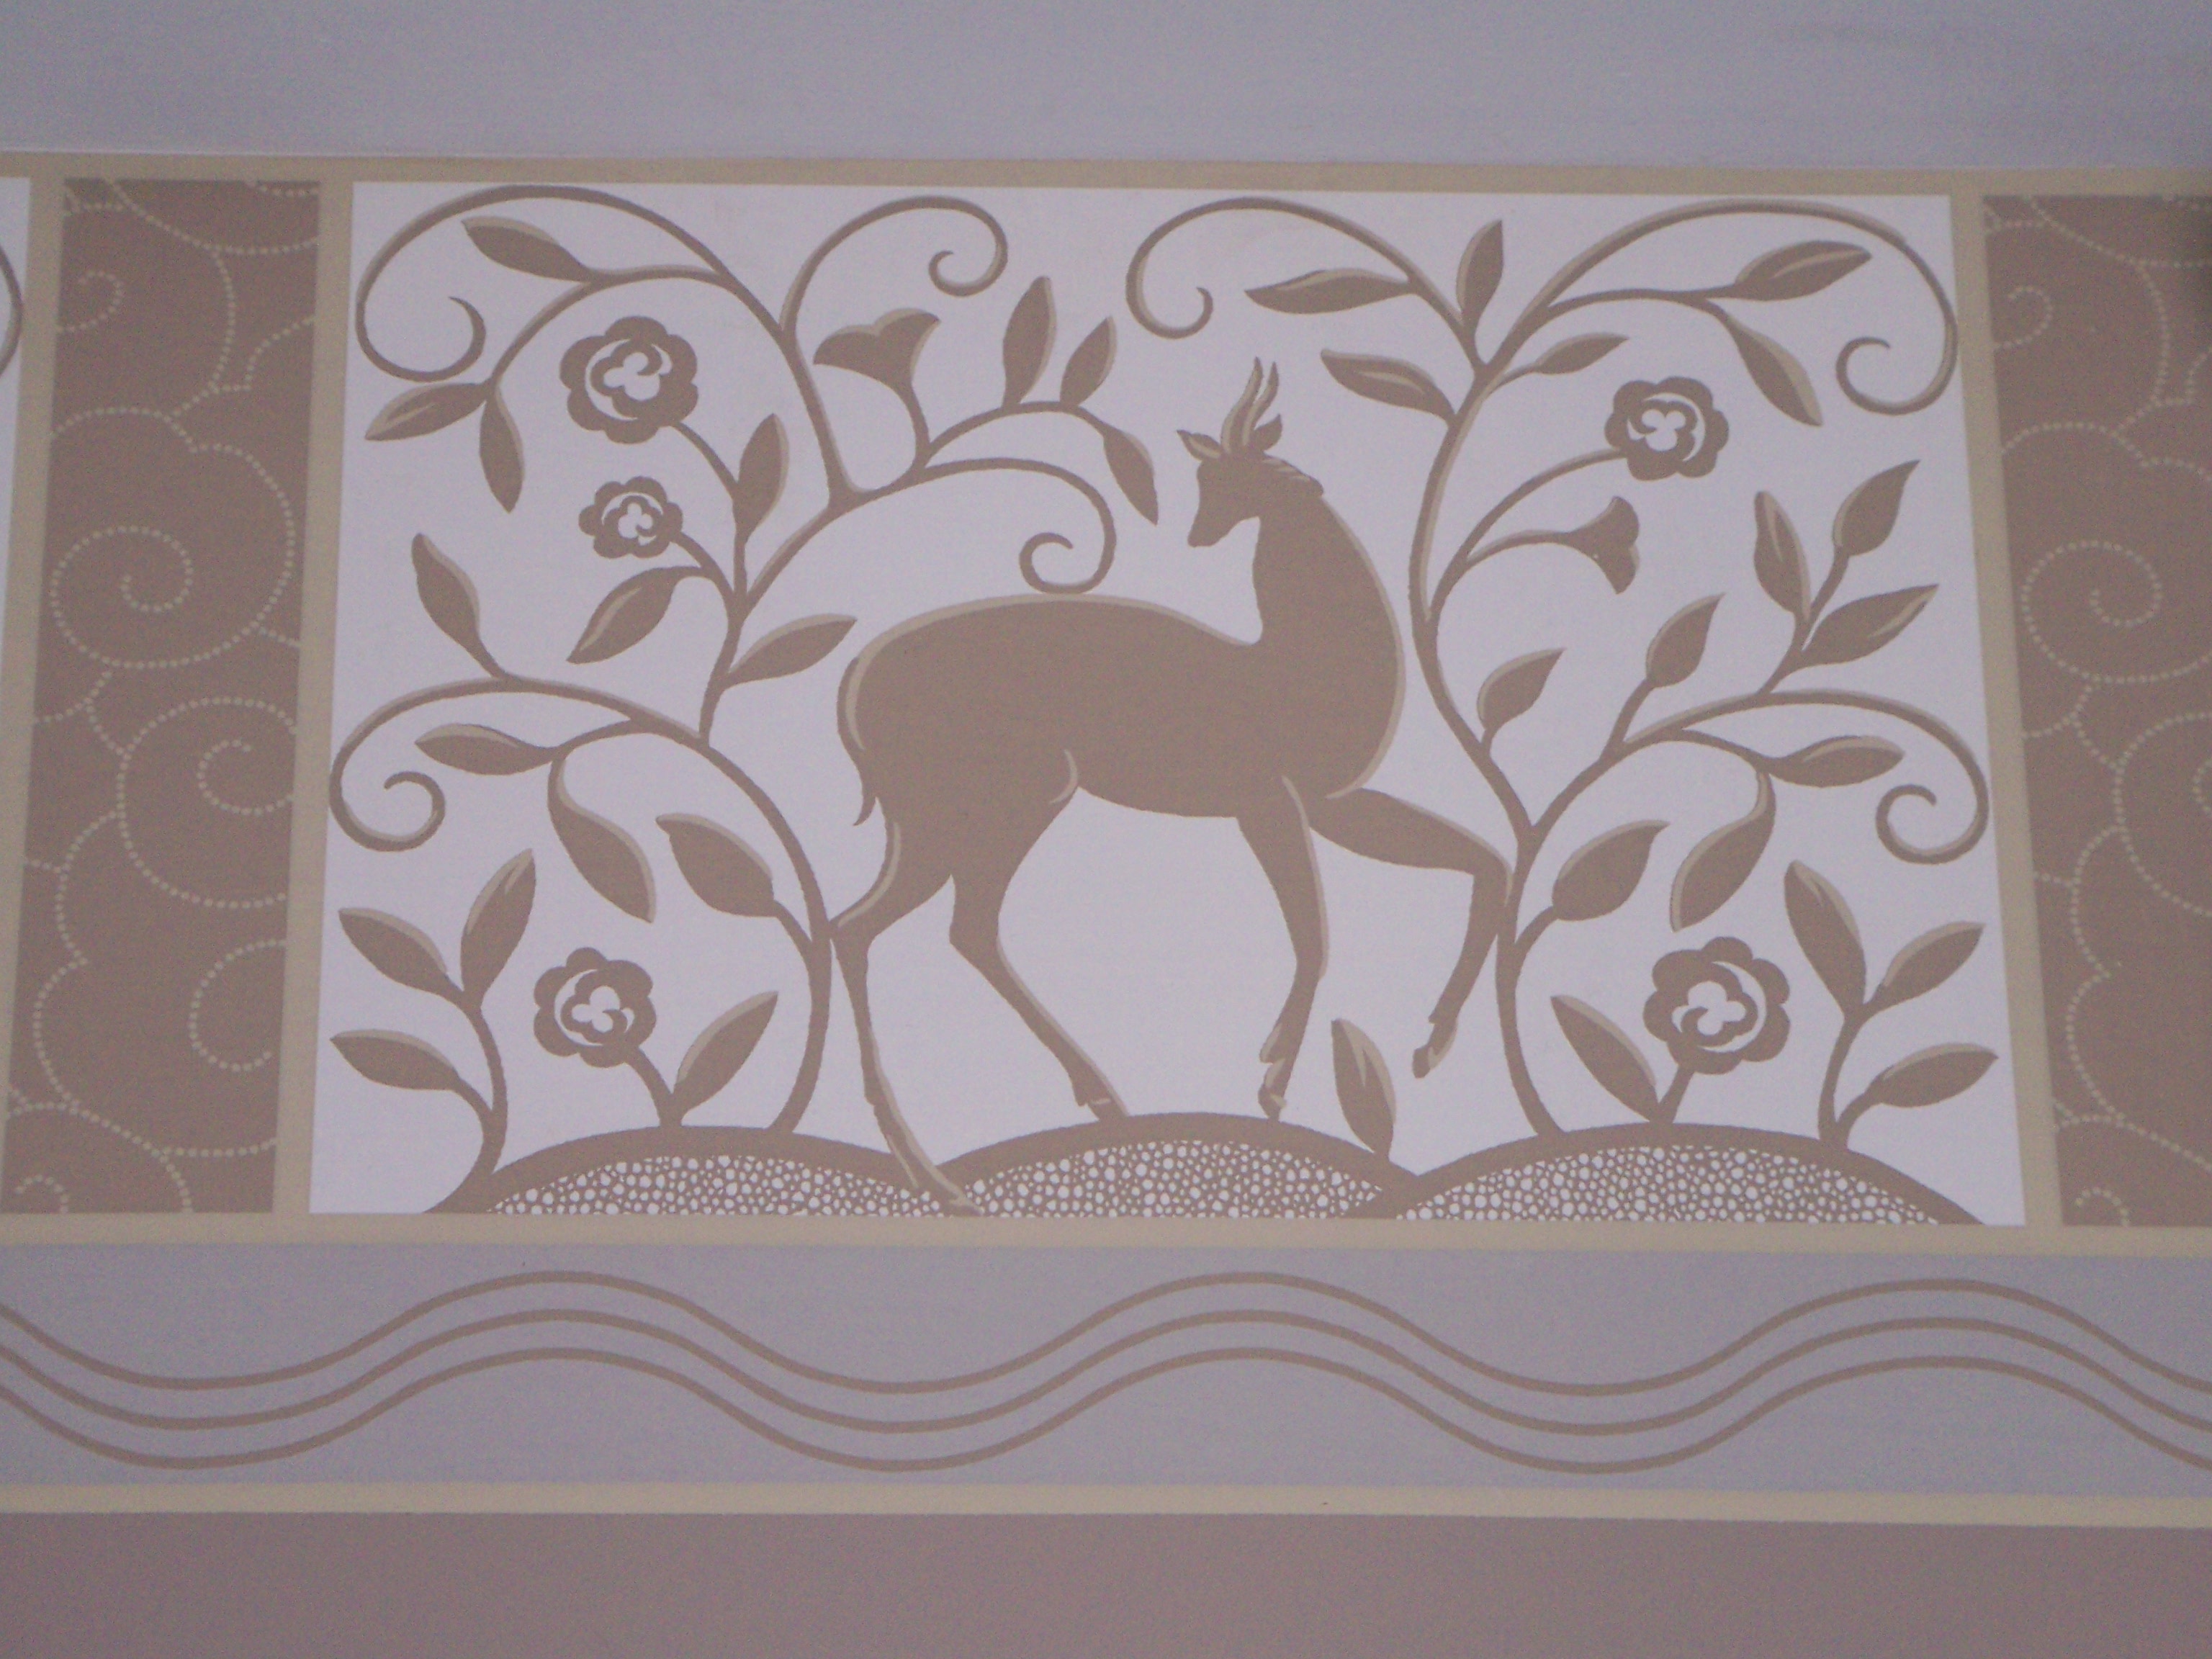 DETAIL ARTS AND CRAFTS REPRODUCTION BORDER tHE gAZELLE 3072x2304